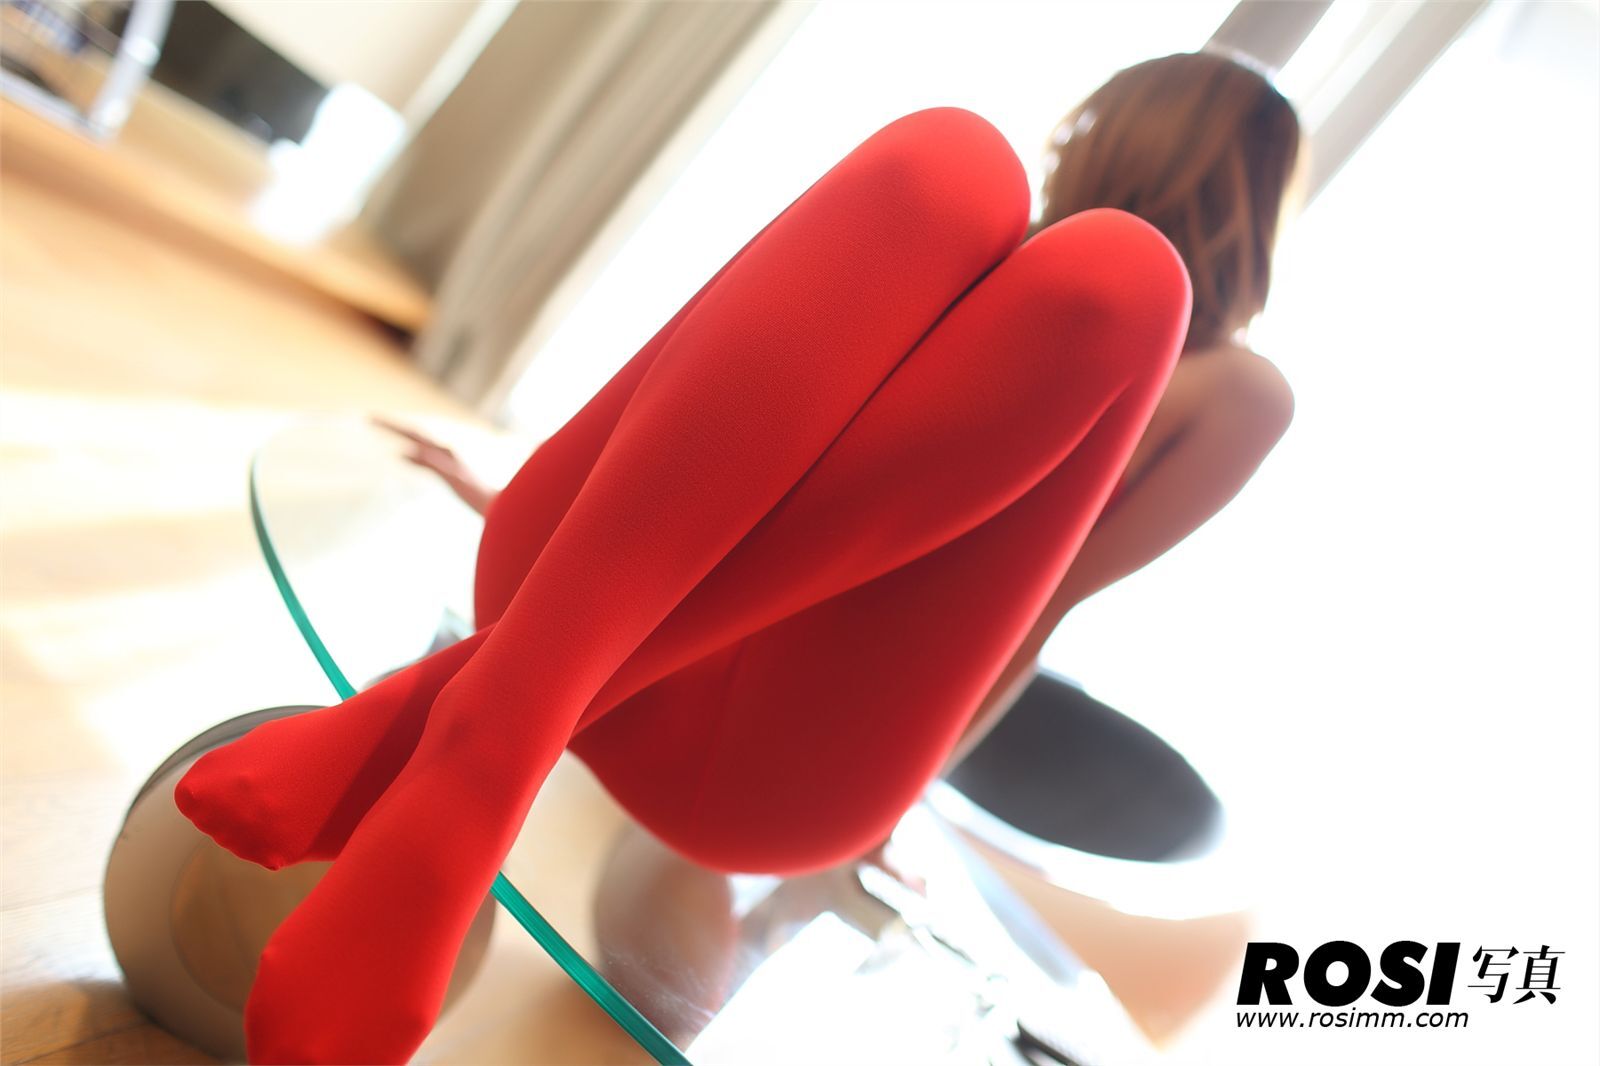 [ROSI] No.190 anonymous photo red clothes red stockings bold super temptation